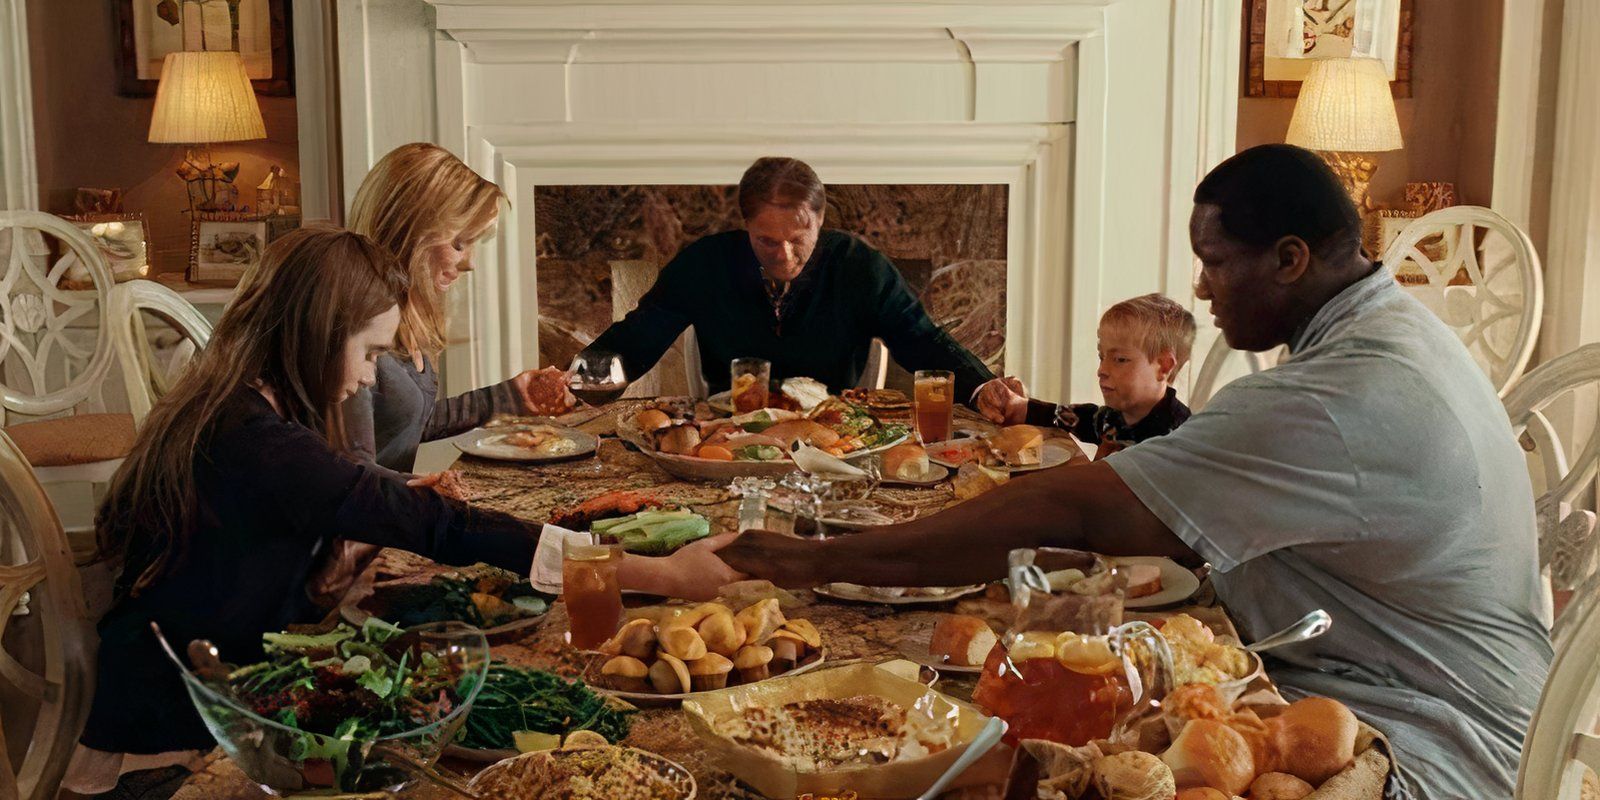 The Tuohy family around the dinner table